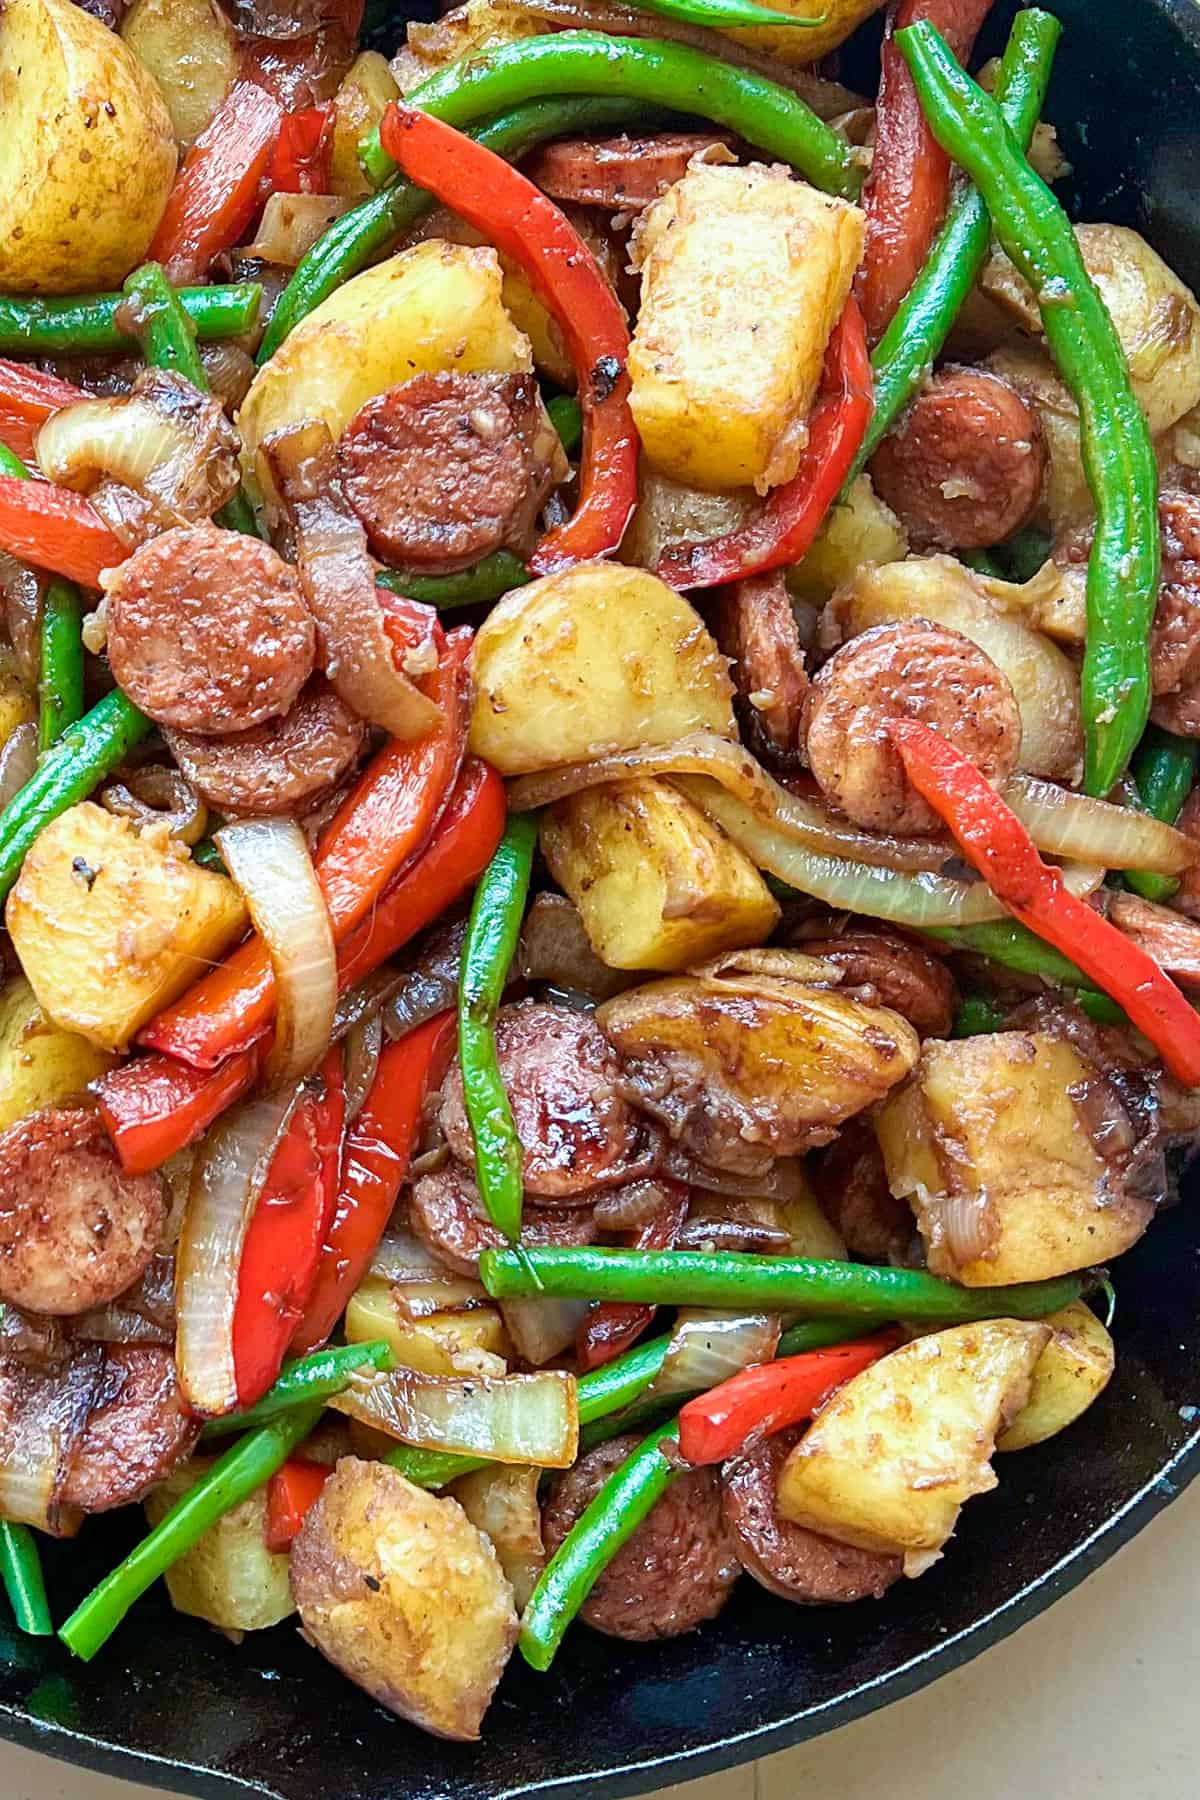 cast iron skillet filled with sautéd slices of sausage, chunks of potato, sliced red bell peppers and green beans